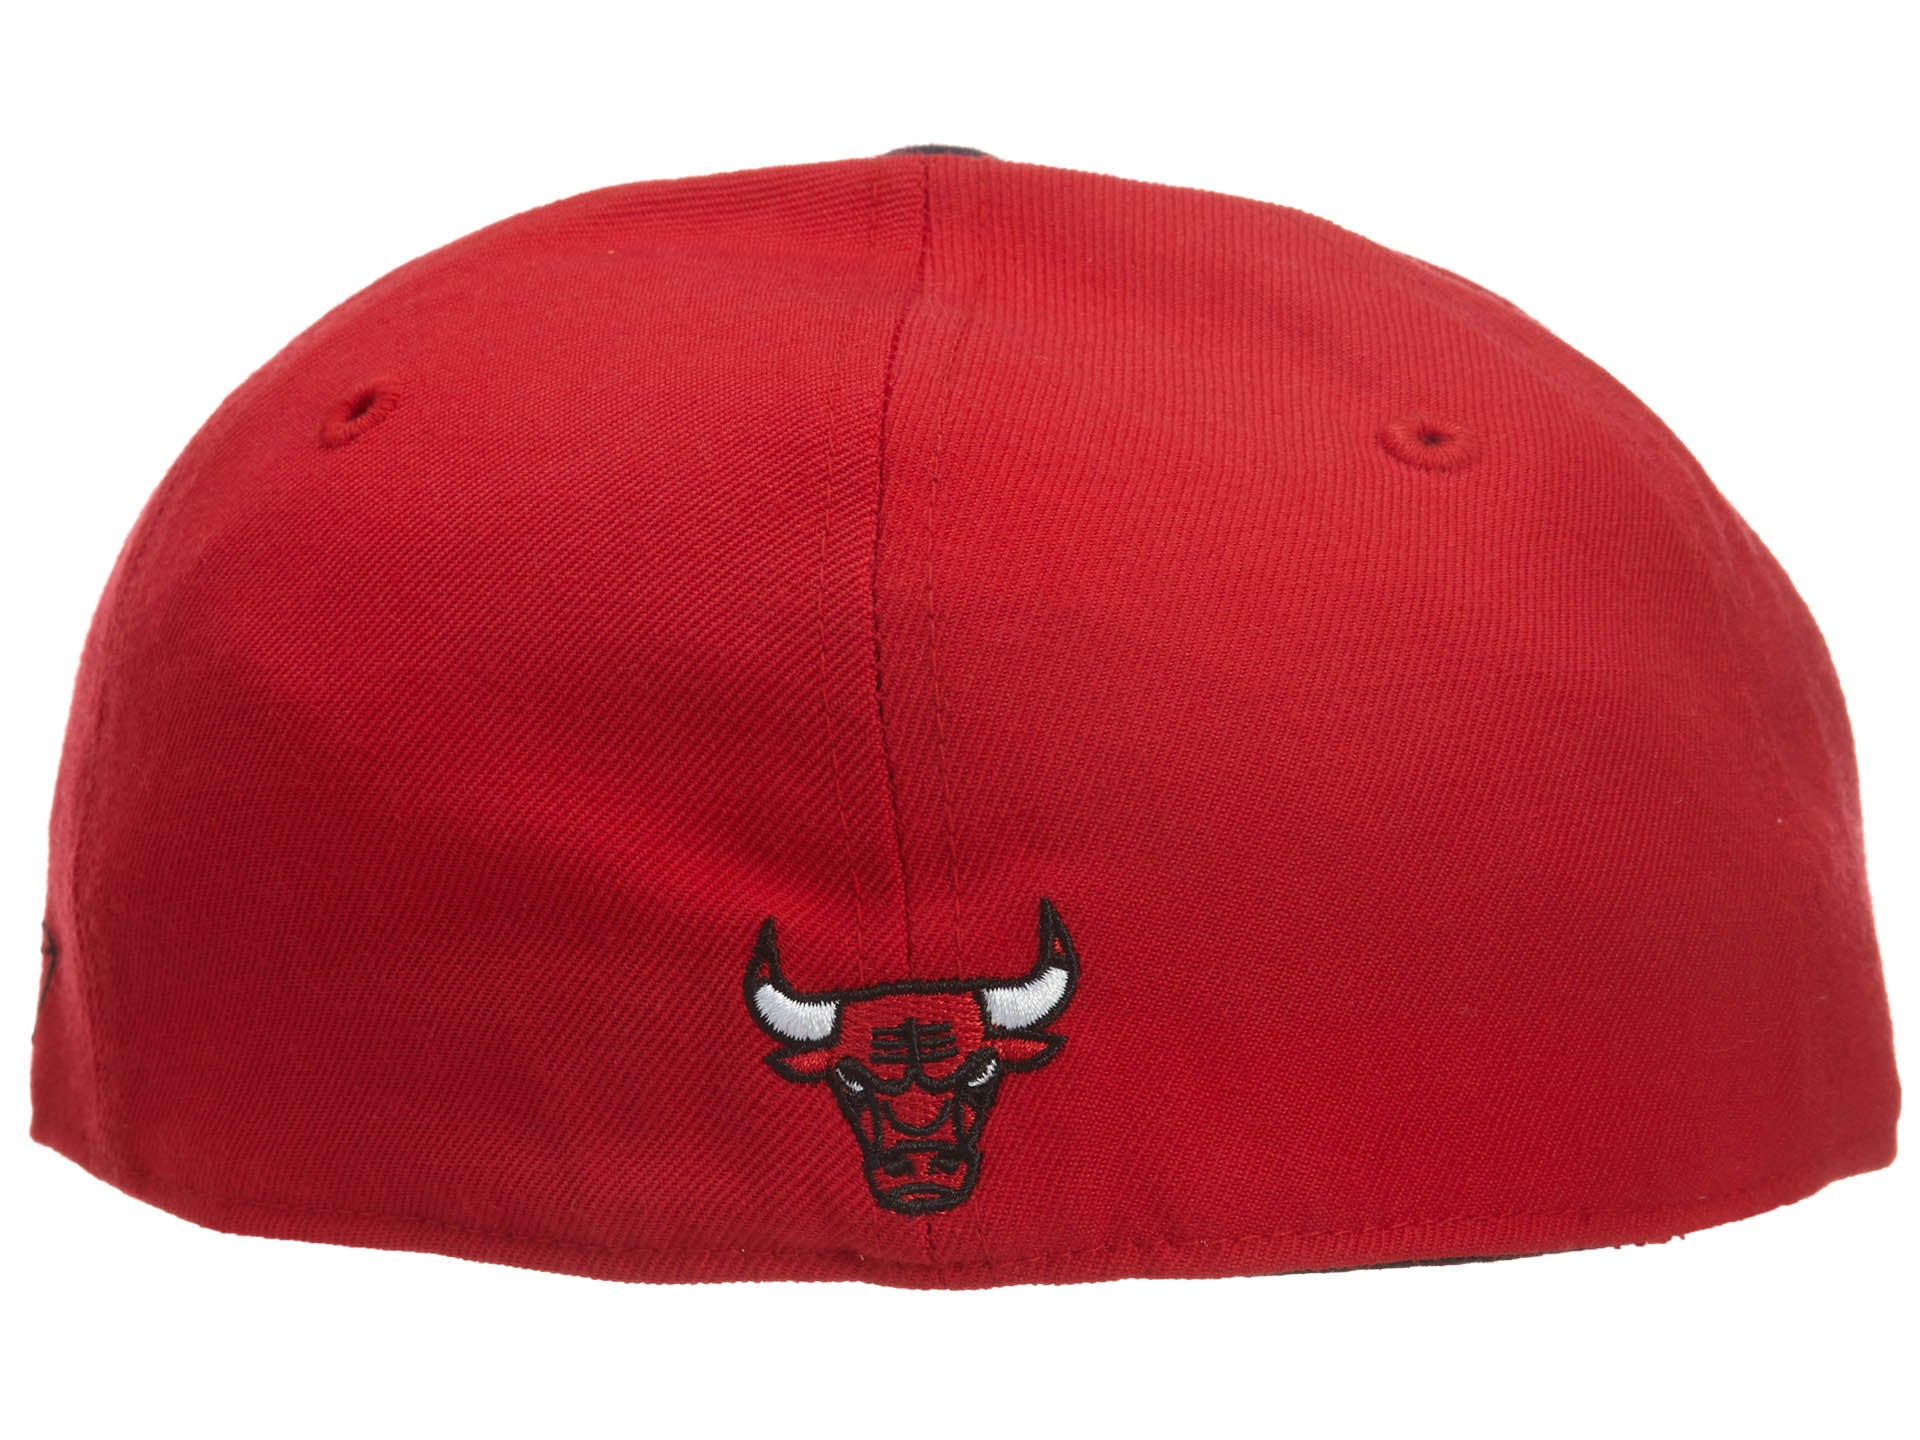 Reebok Chicago Bulls Fitted Hat Mens Style : Hat163